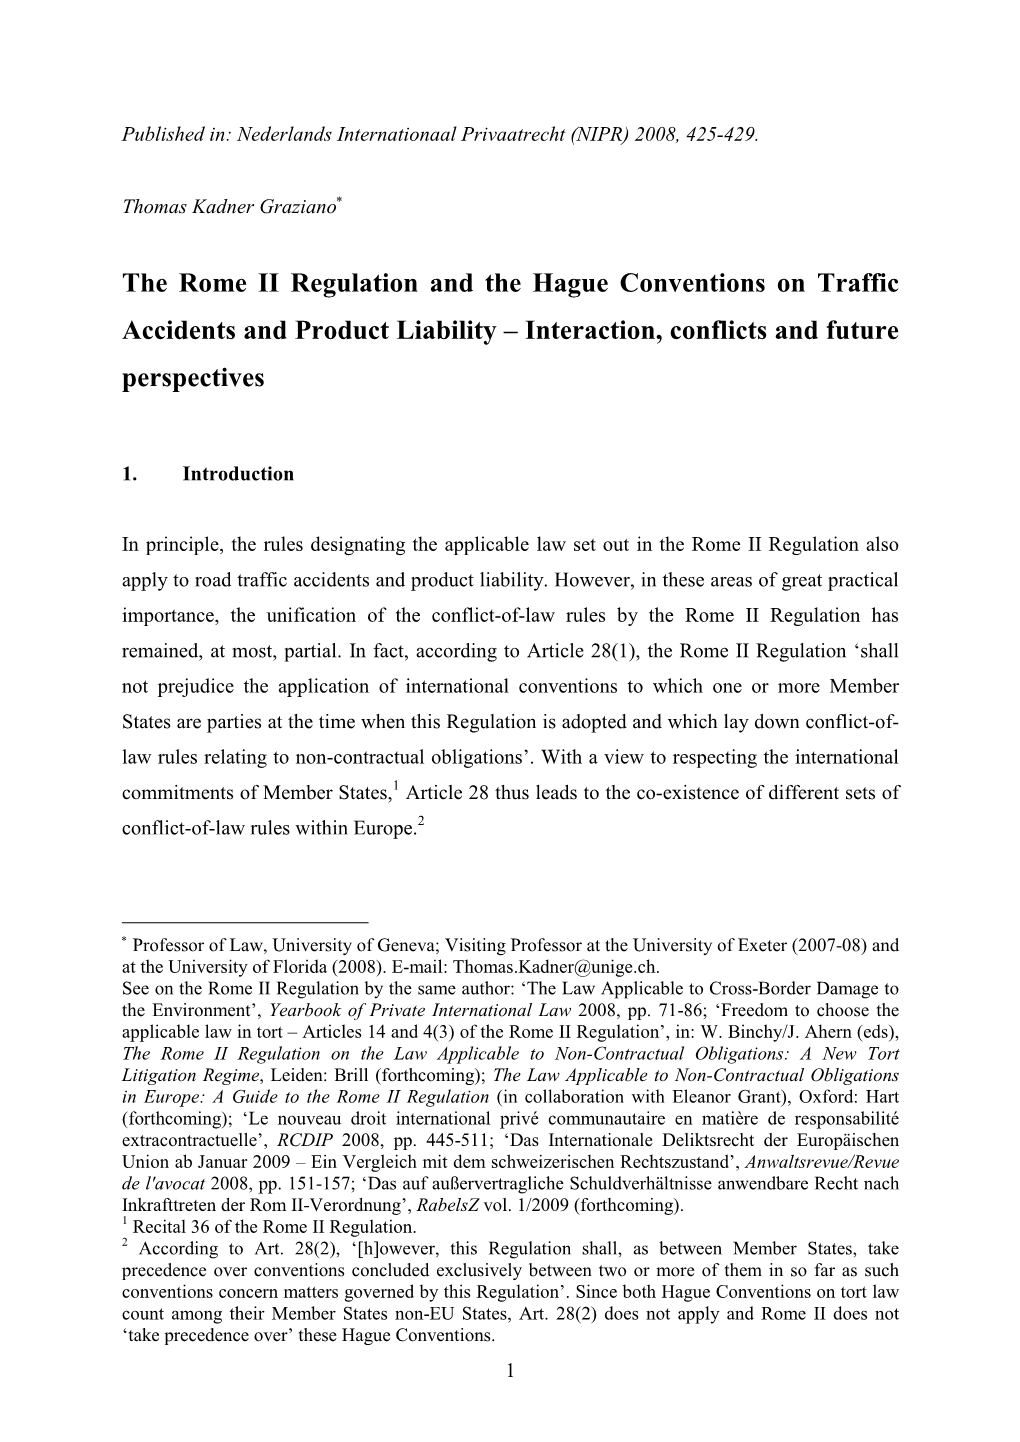 The Rome II Regulation and the Hague Conventions on Traffic Accidents and Product Liability – Interaction, Conflicts and Future Perspectives